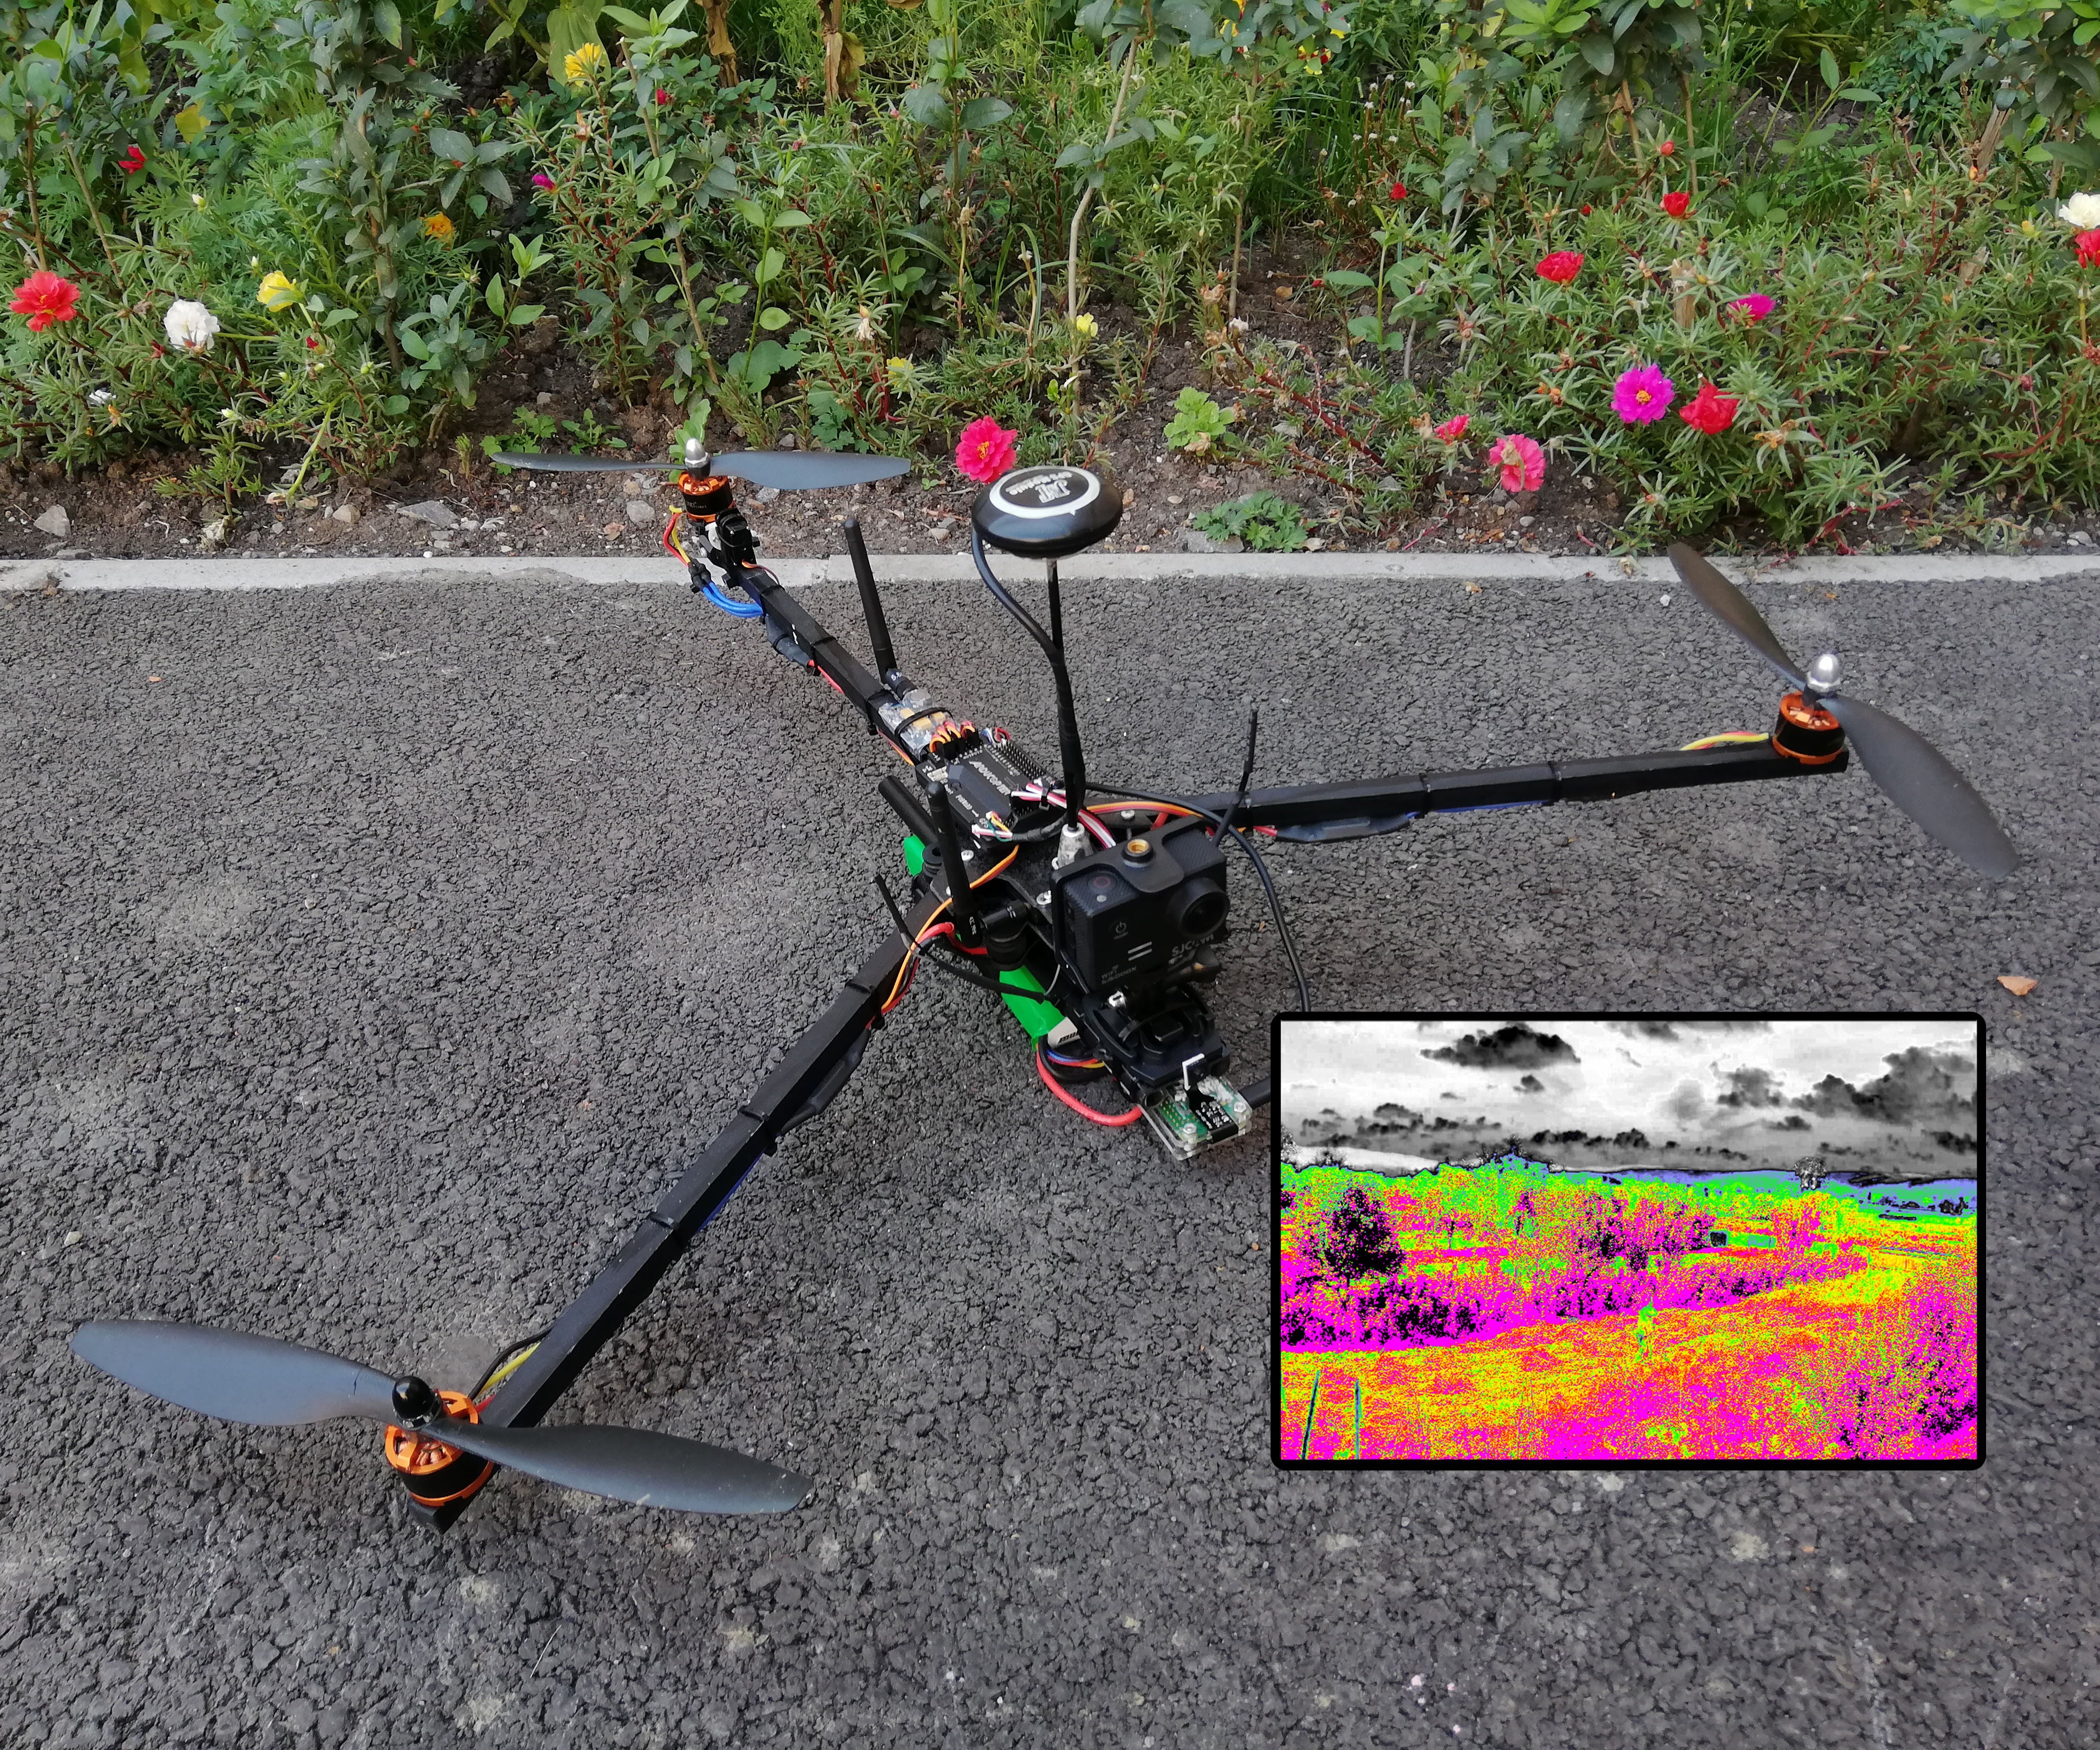 DIY Plant Inspection Gardening Drone (Folding Tricopter on a Budget)